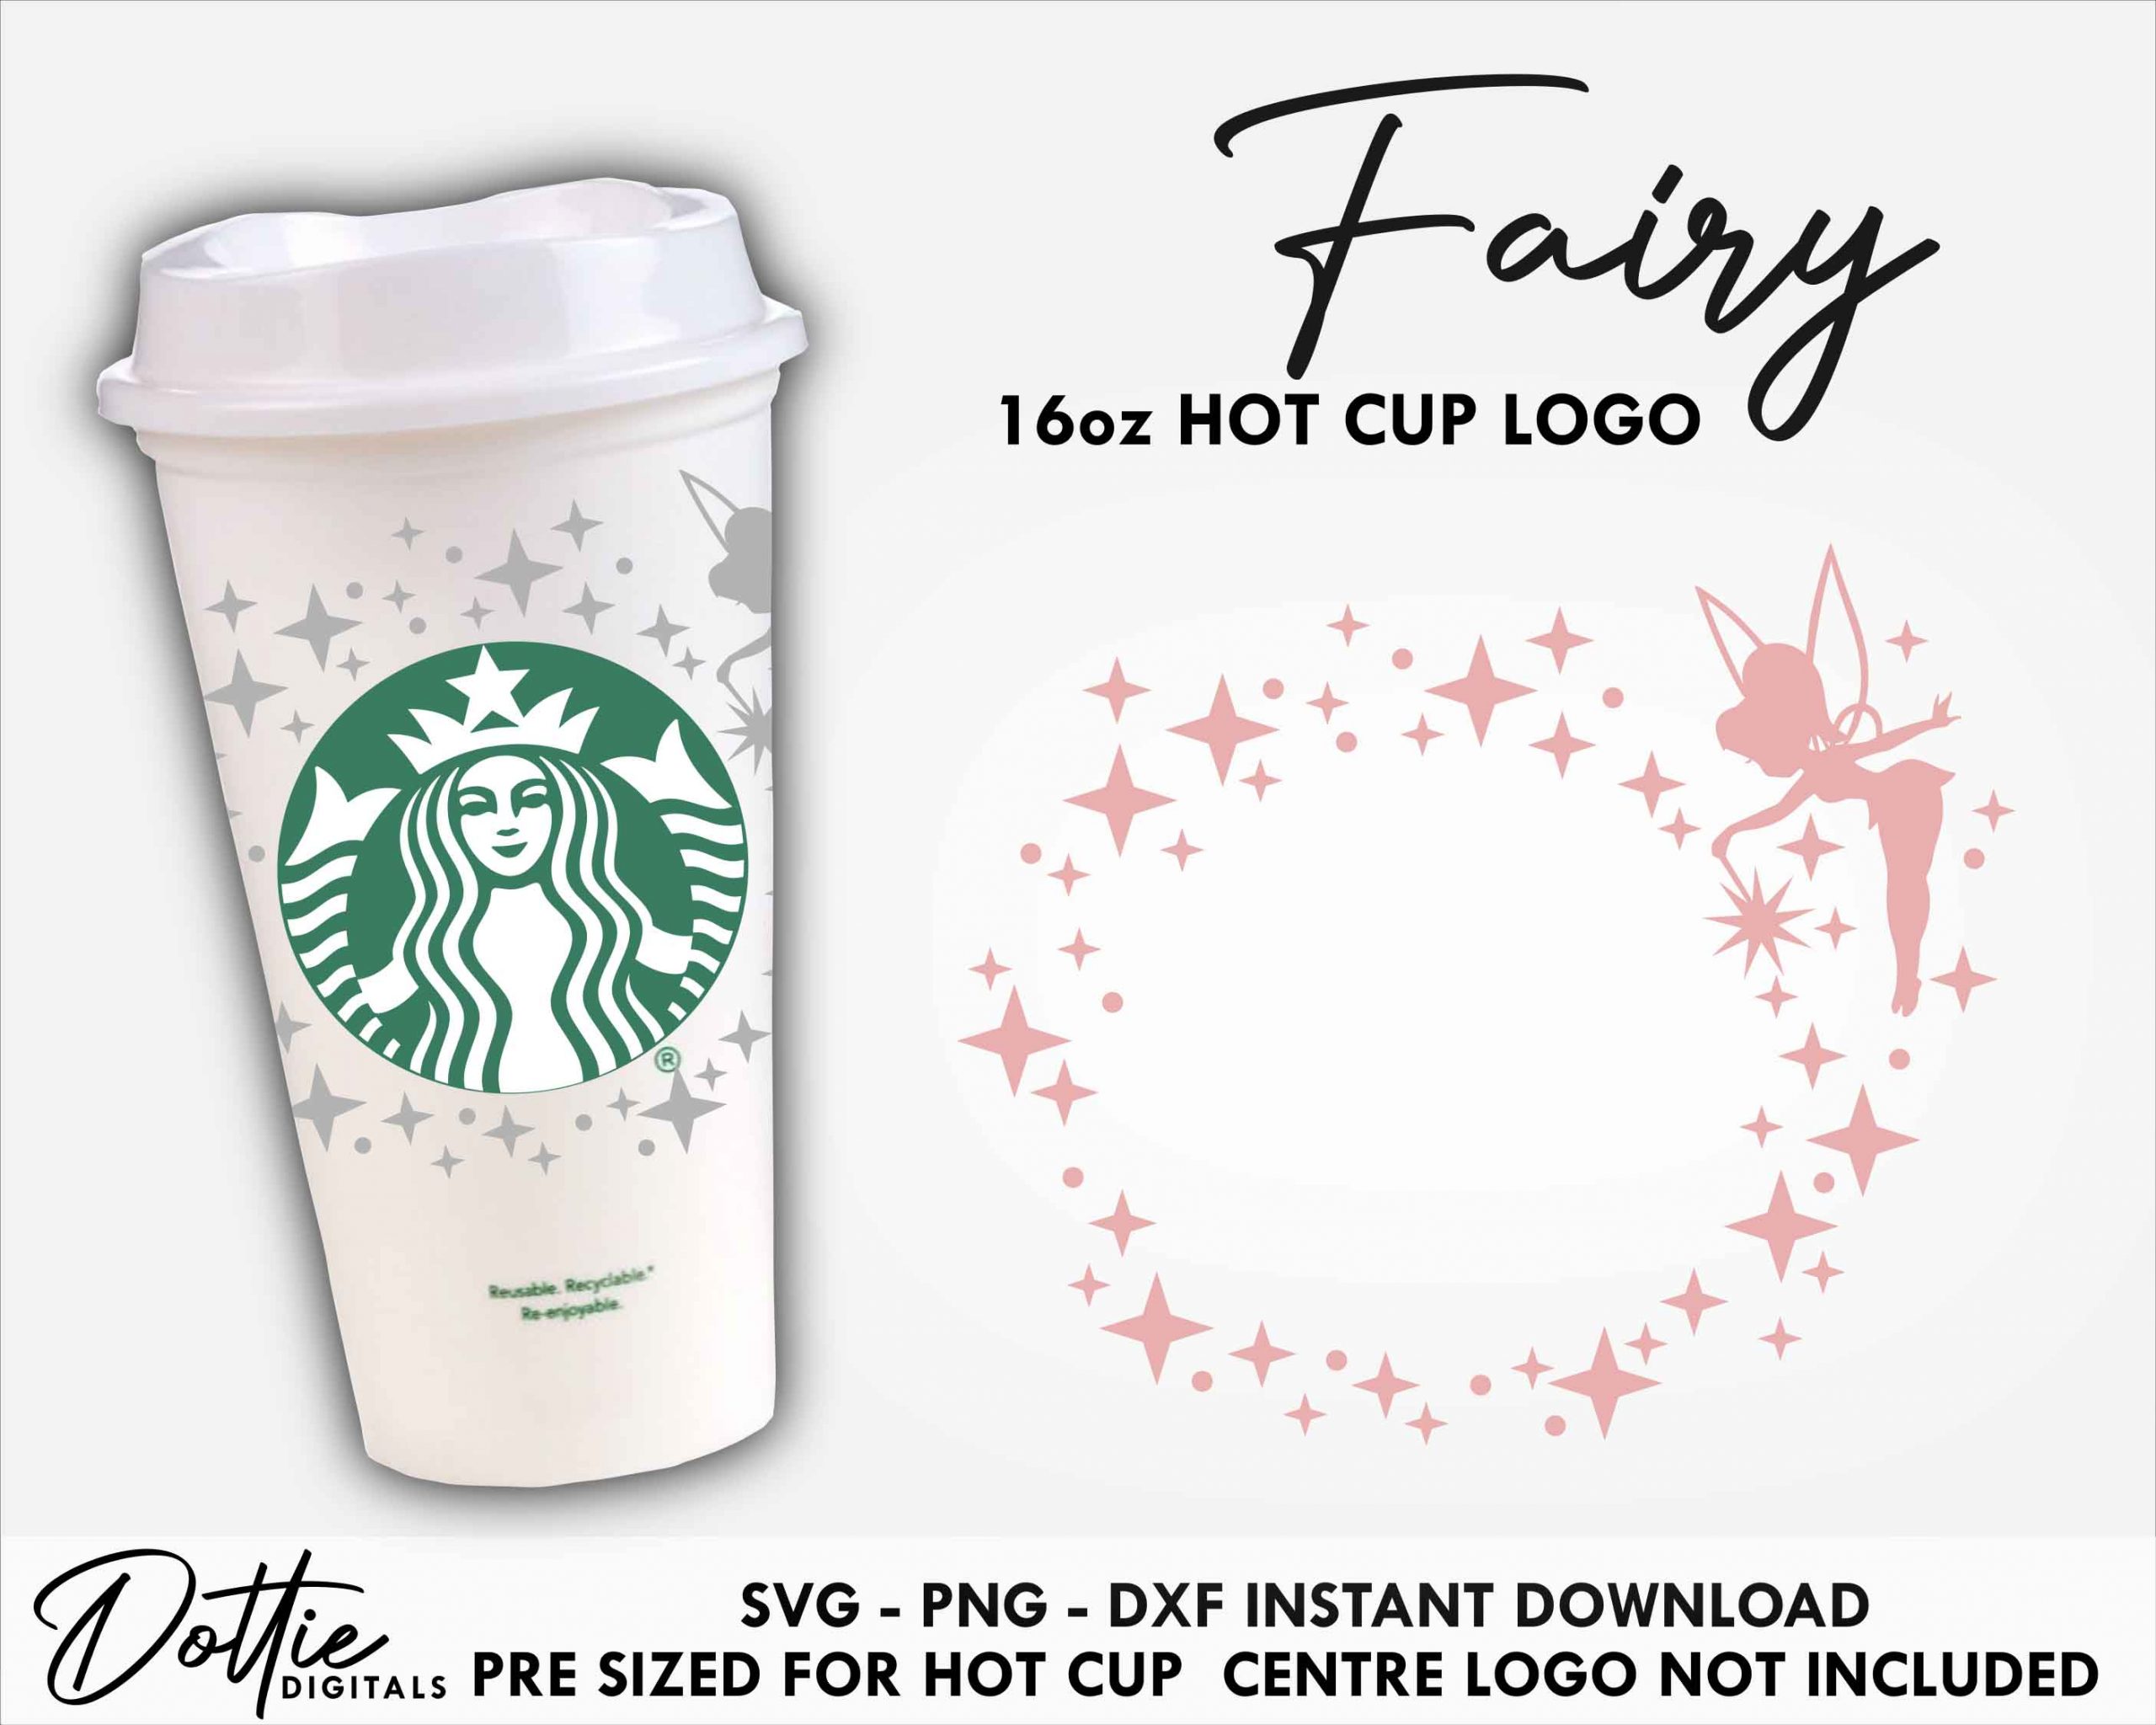 Dottie Digitals - Starbucks Cup SVG Stockings Hot Cup Svg PNG DXF Xmas  Cutting File 16oz Grande Instant Digital Download Holidays Travel Coffee  Cricut